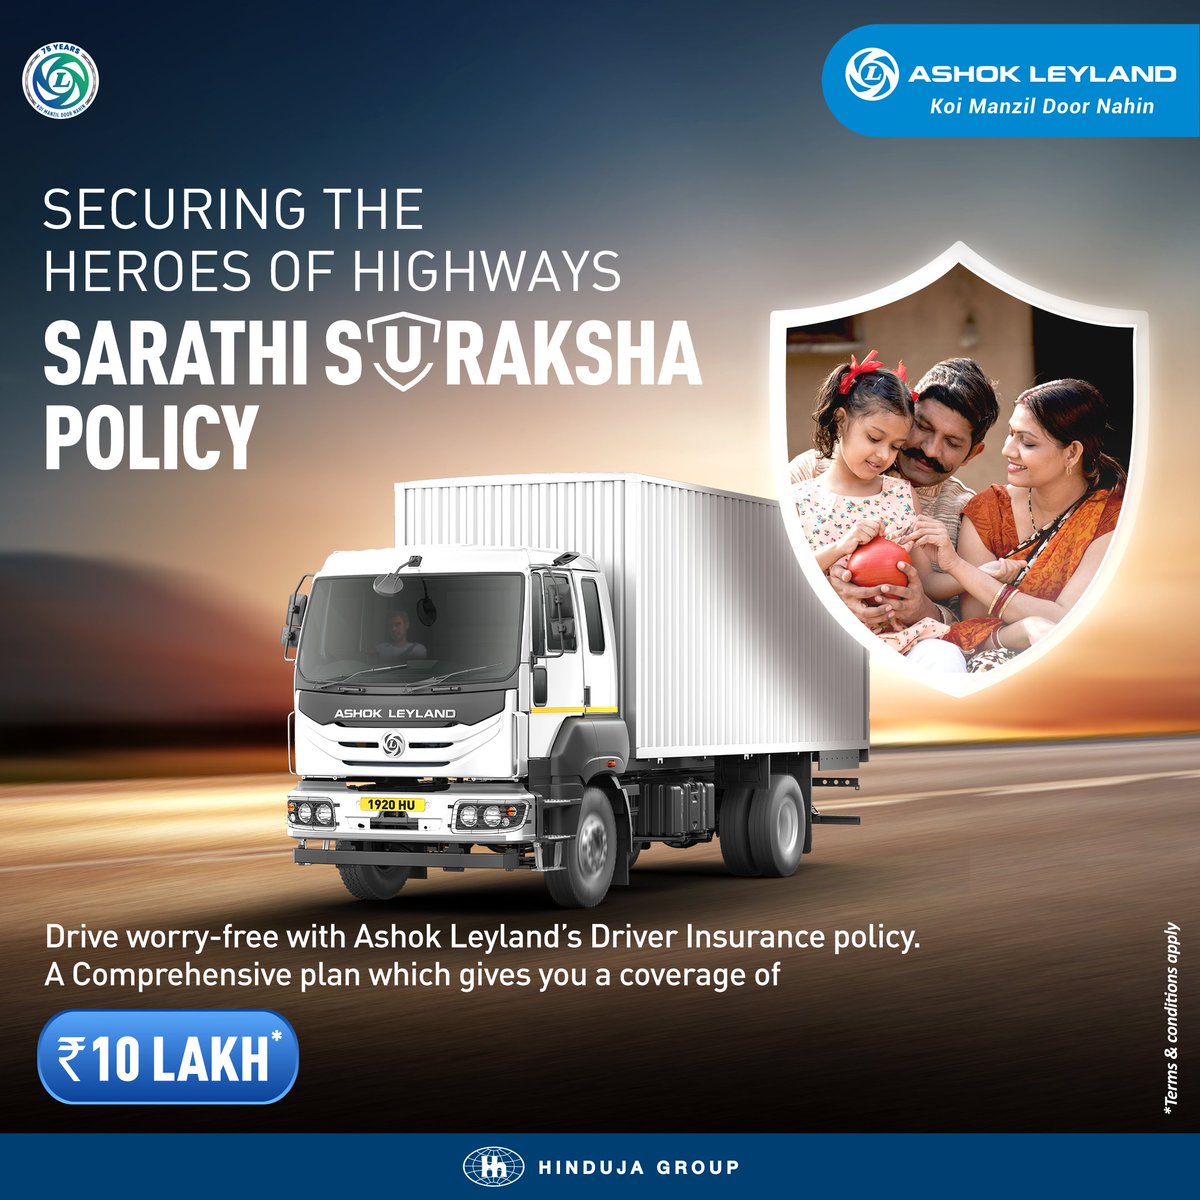 Your safety, our priority. Secure your path ahead with Ashok Leyland's Sarthi Suraksha-Driver insurance for India's highway heroes. Note: This policy is only applicable for our Haulage, MAV,& ICV trucks. #AshokLeyland #KoiManzilDoorNahin #AshokLeylandIndia #AshokLeylandOfficial